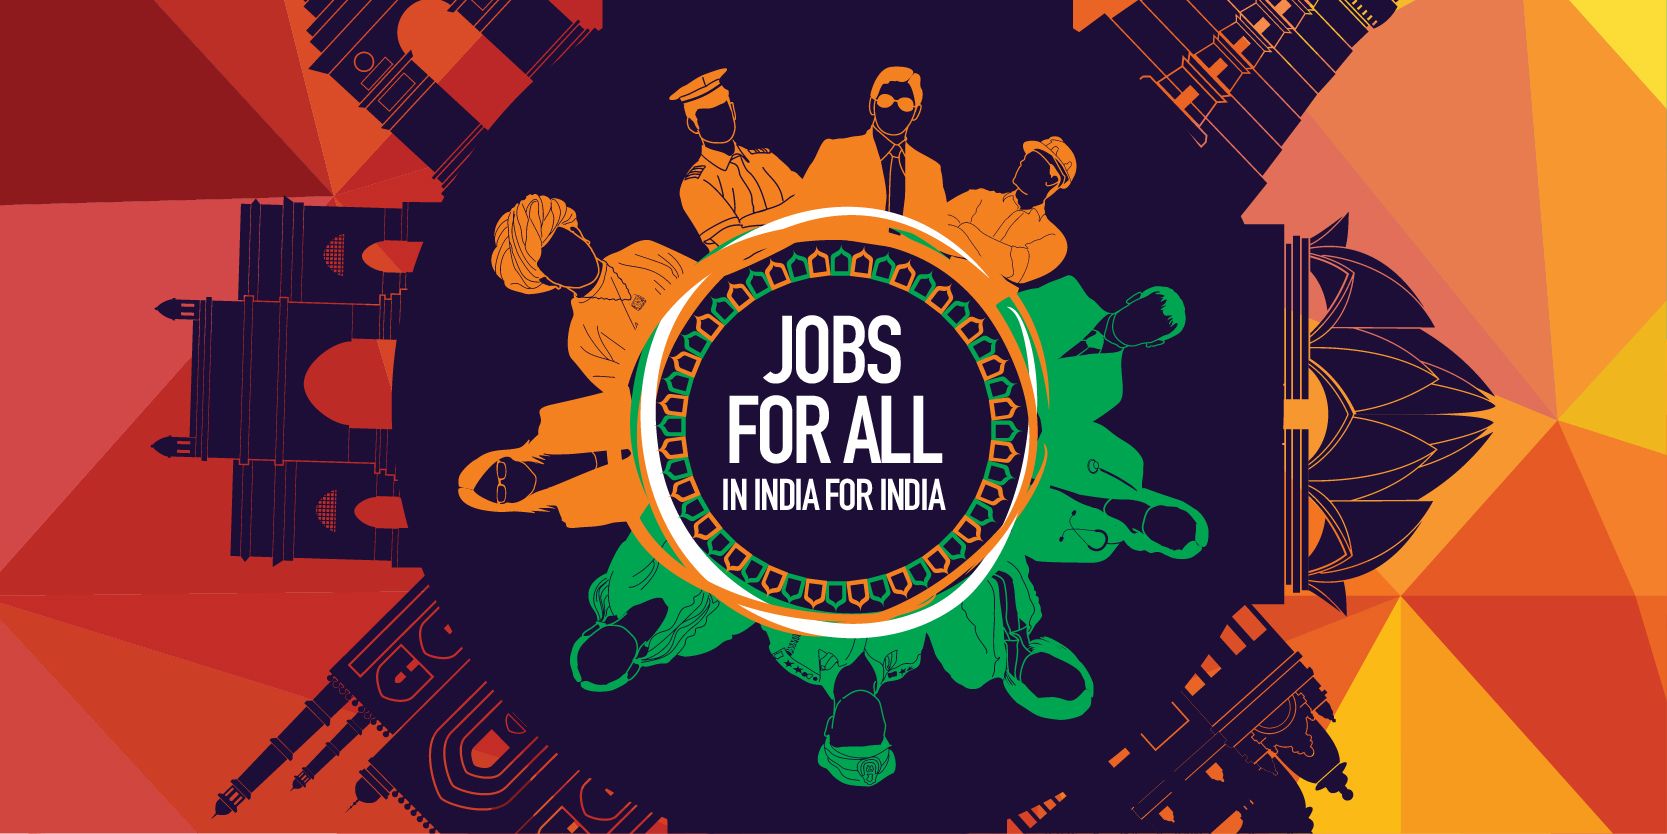 Jobs for All: YourStory launches India-wide campaign to mobilise job creation in India, be a voice for job seekers